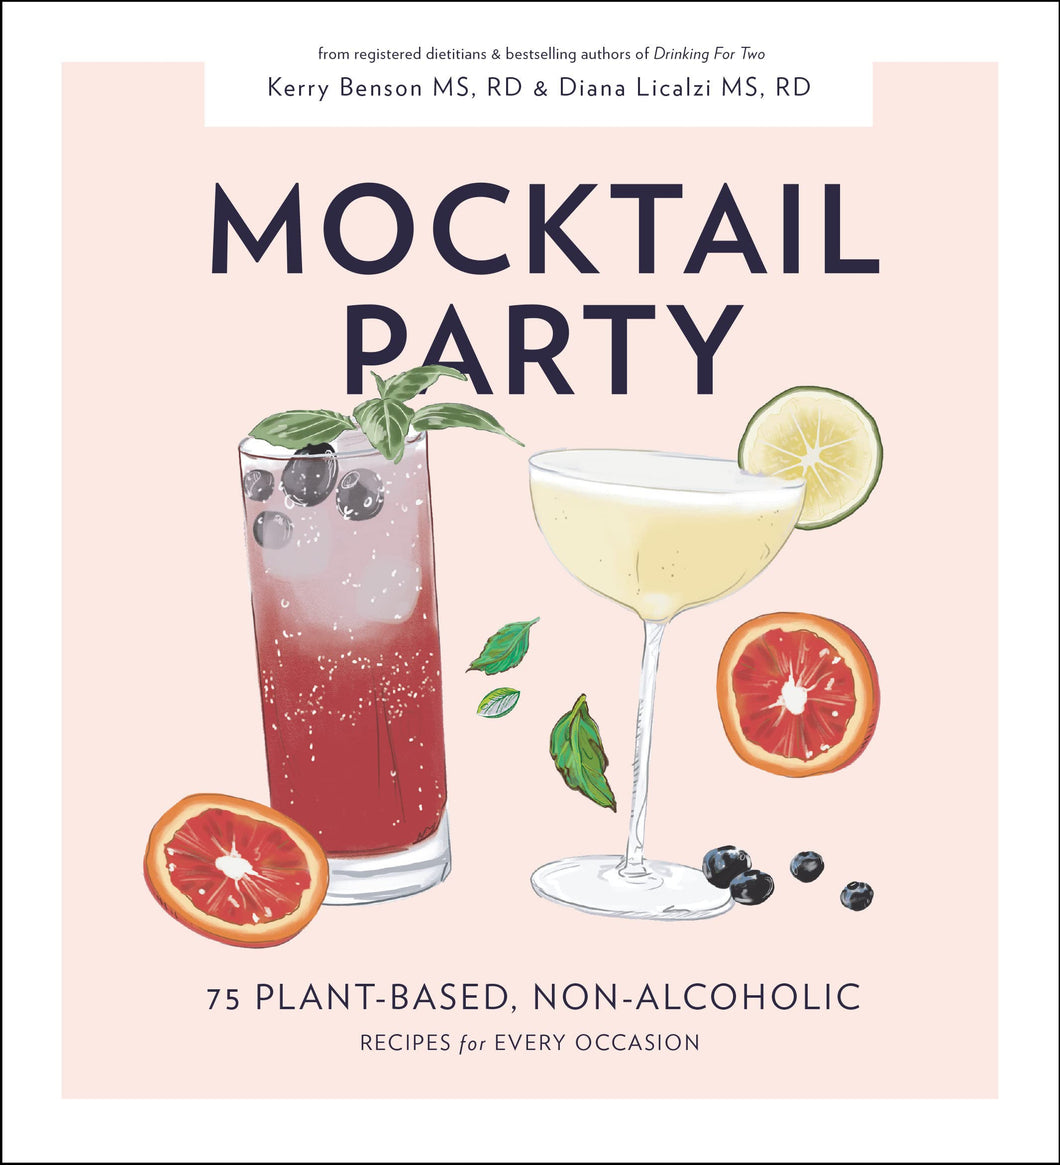 Mocktail Party: 75 Plant-Based, Non-Alcoholic Mocktail Recipes for Every Occasion [Diana Licalzi & Kerry Benson]